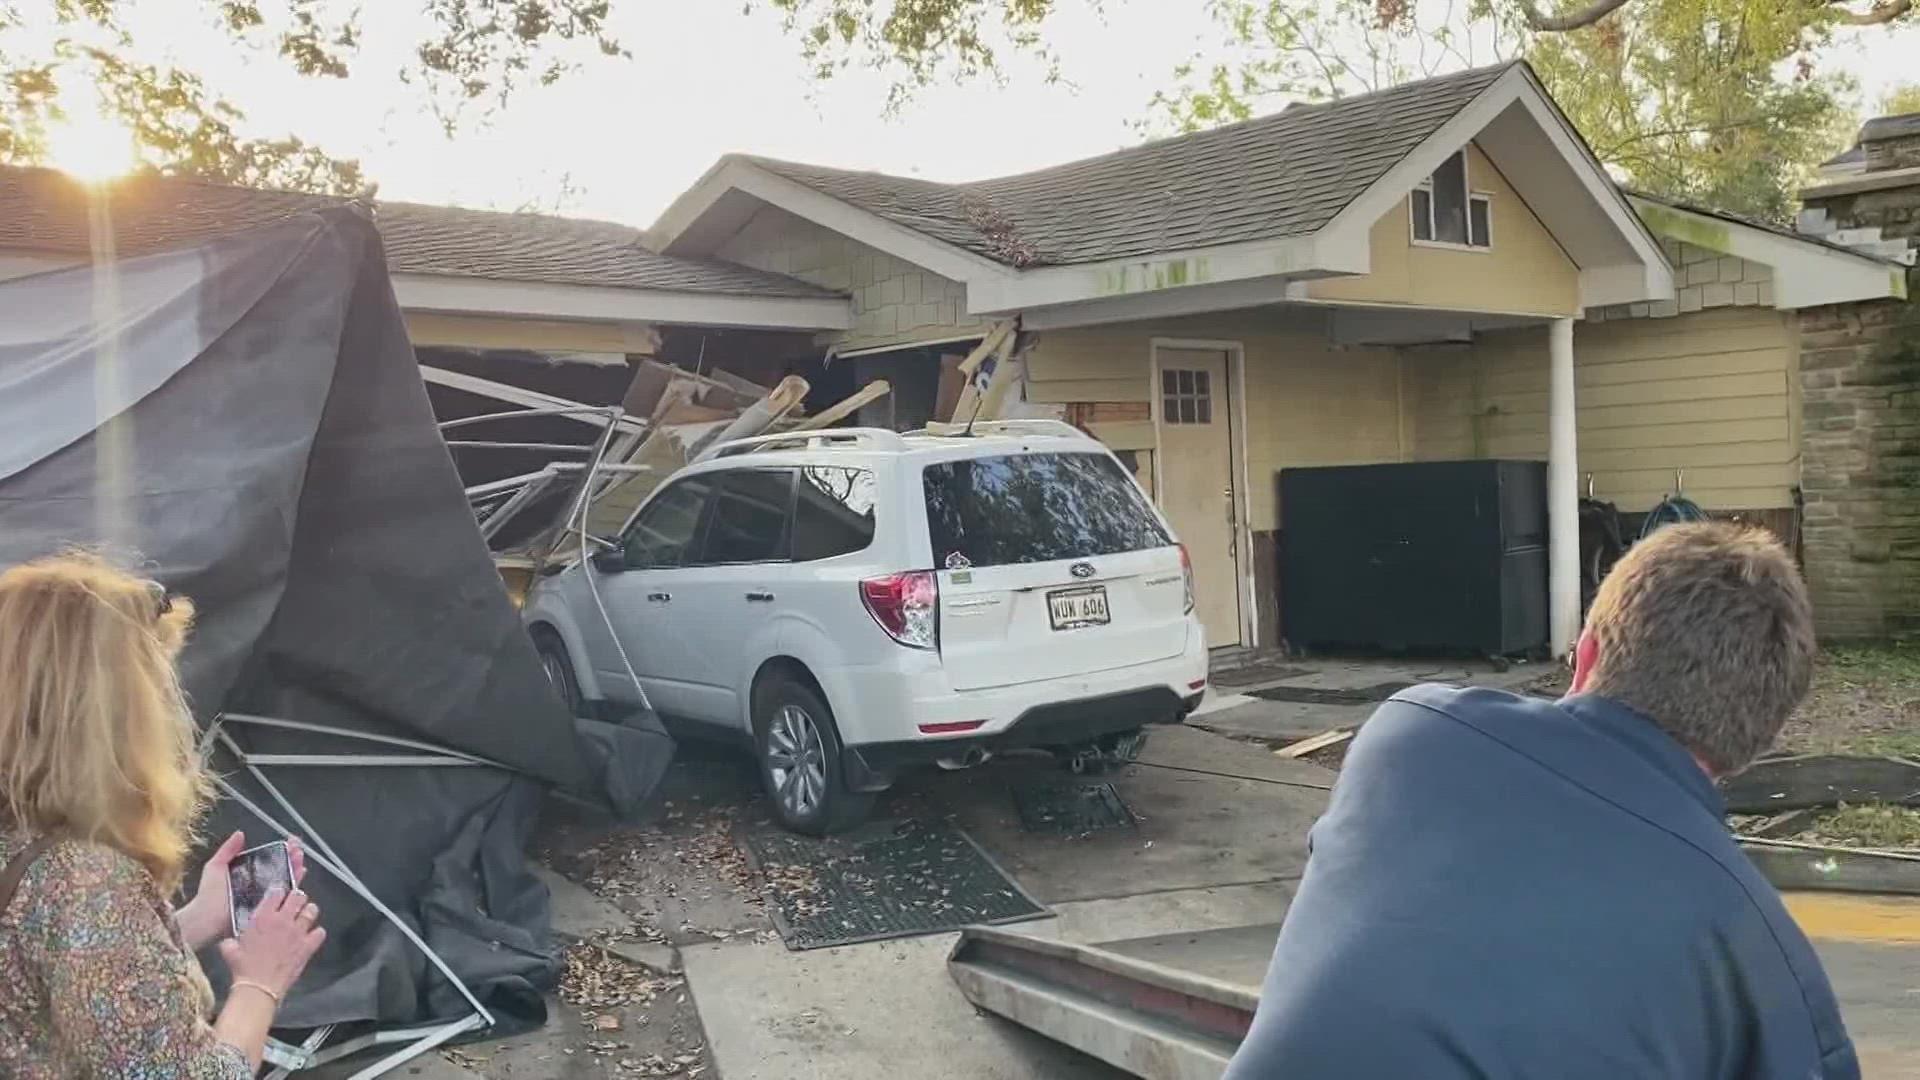 A homeowner is thankful to be uninjured after a vehicle drove into his home Wednesday just moents after leaving his living room.